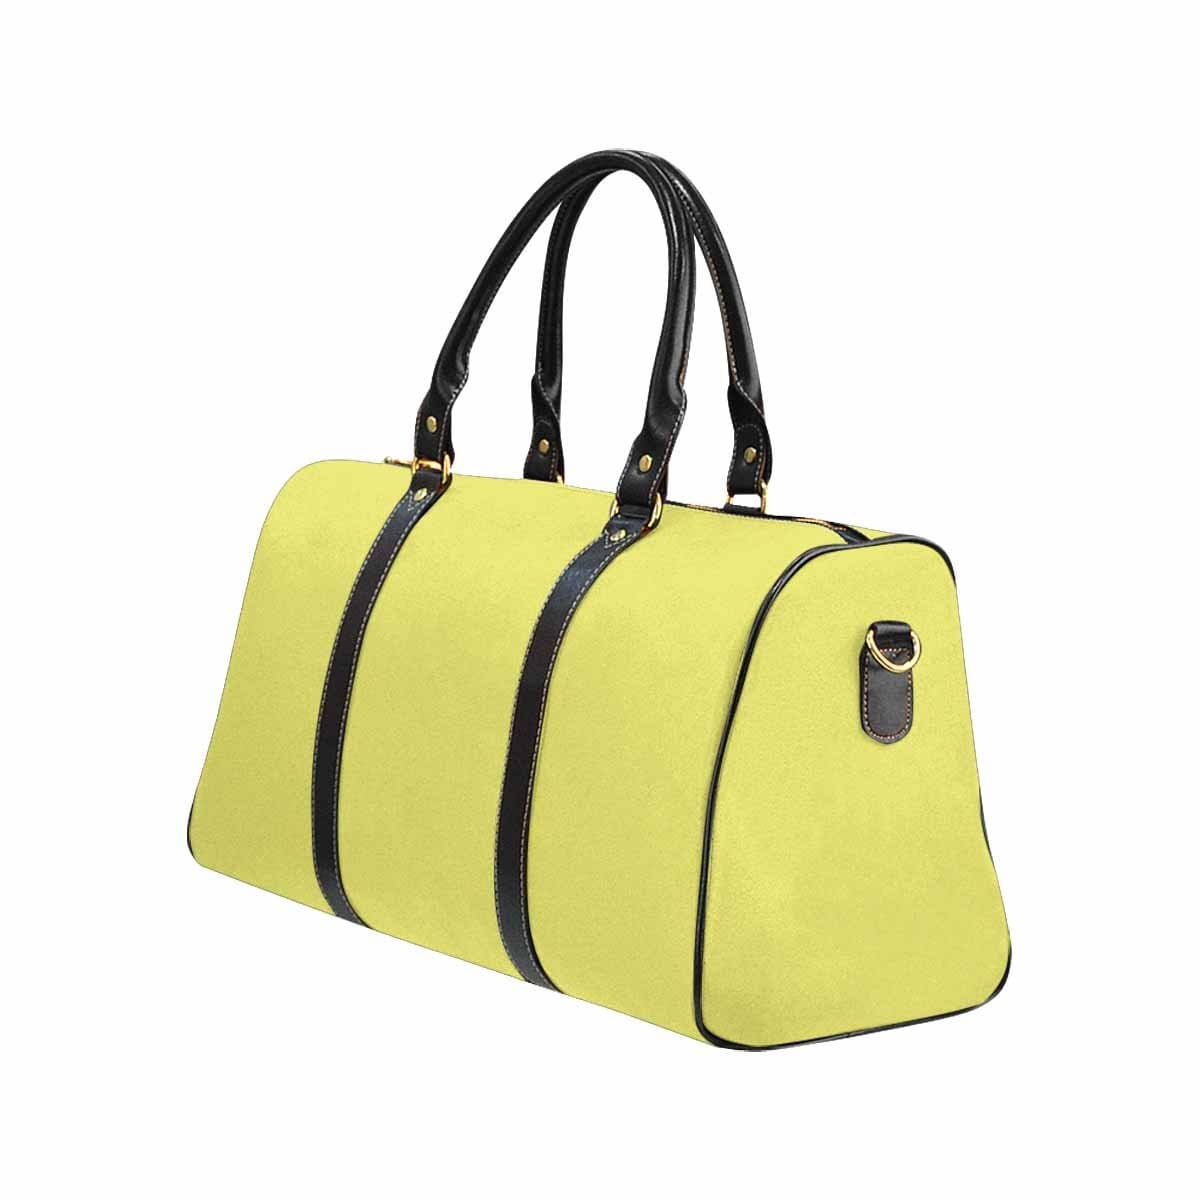 Travel Bag Leather Carry On Large Luggage Bag Honeysuckle Yellow - Bags | Travel